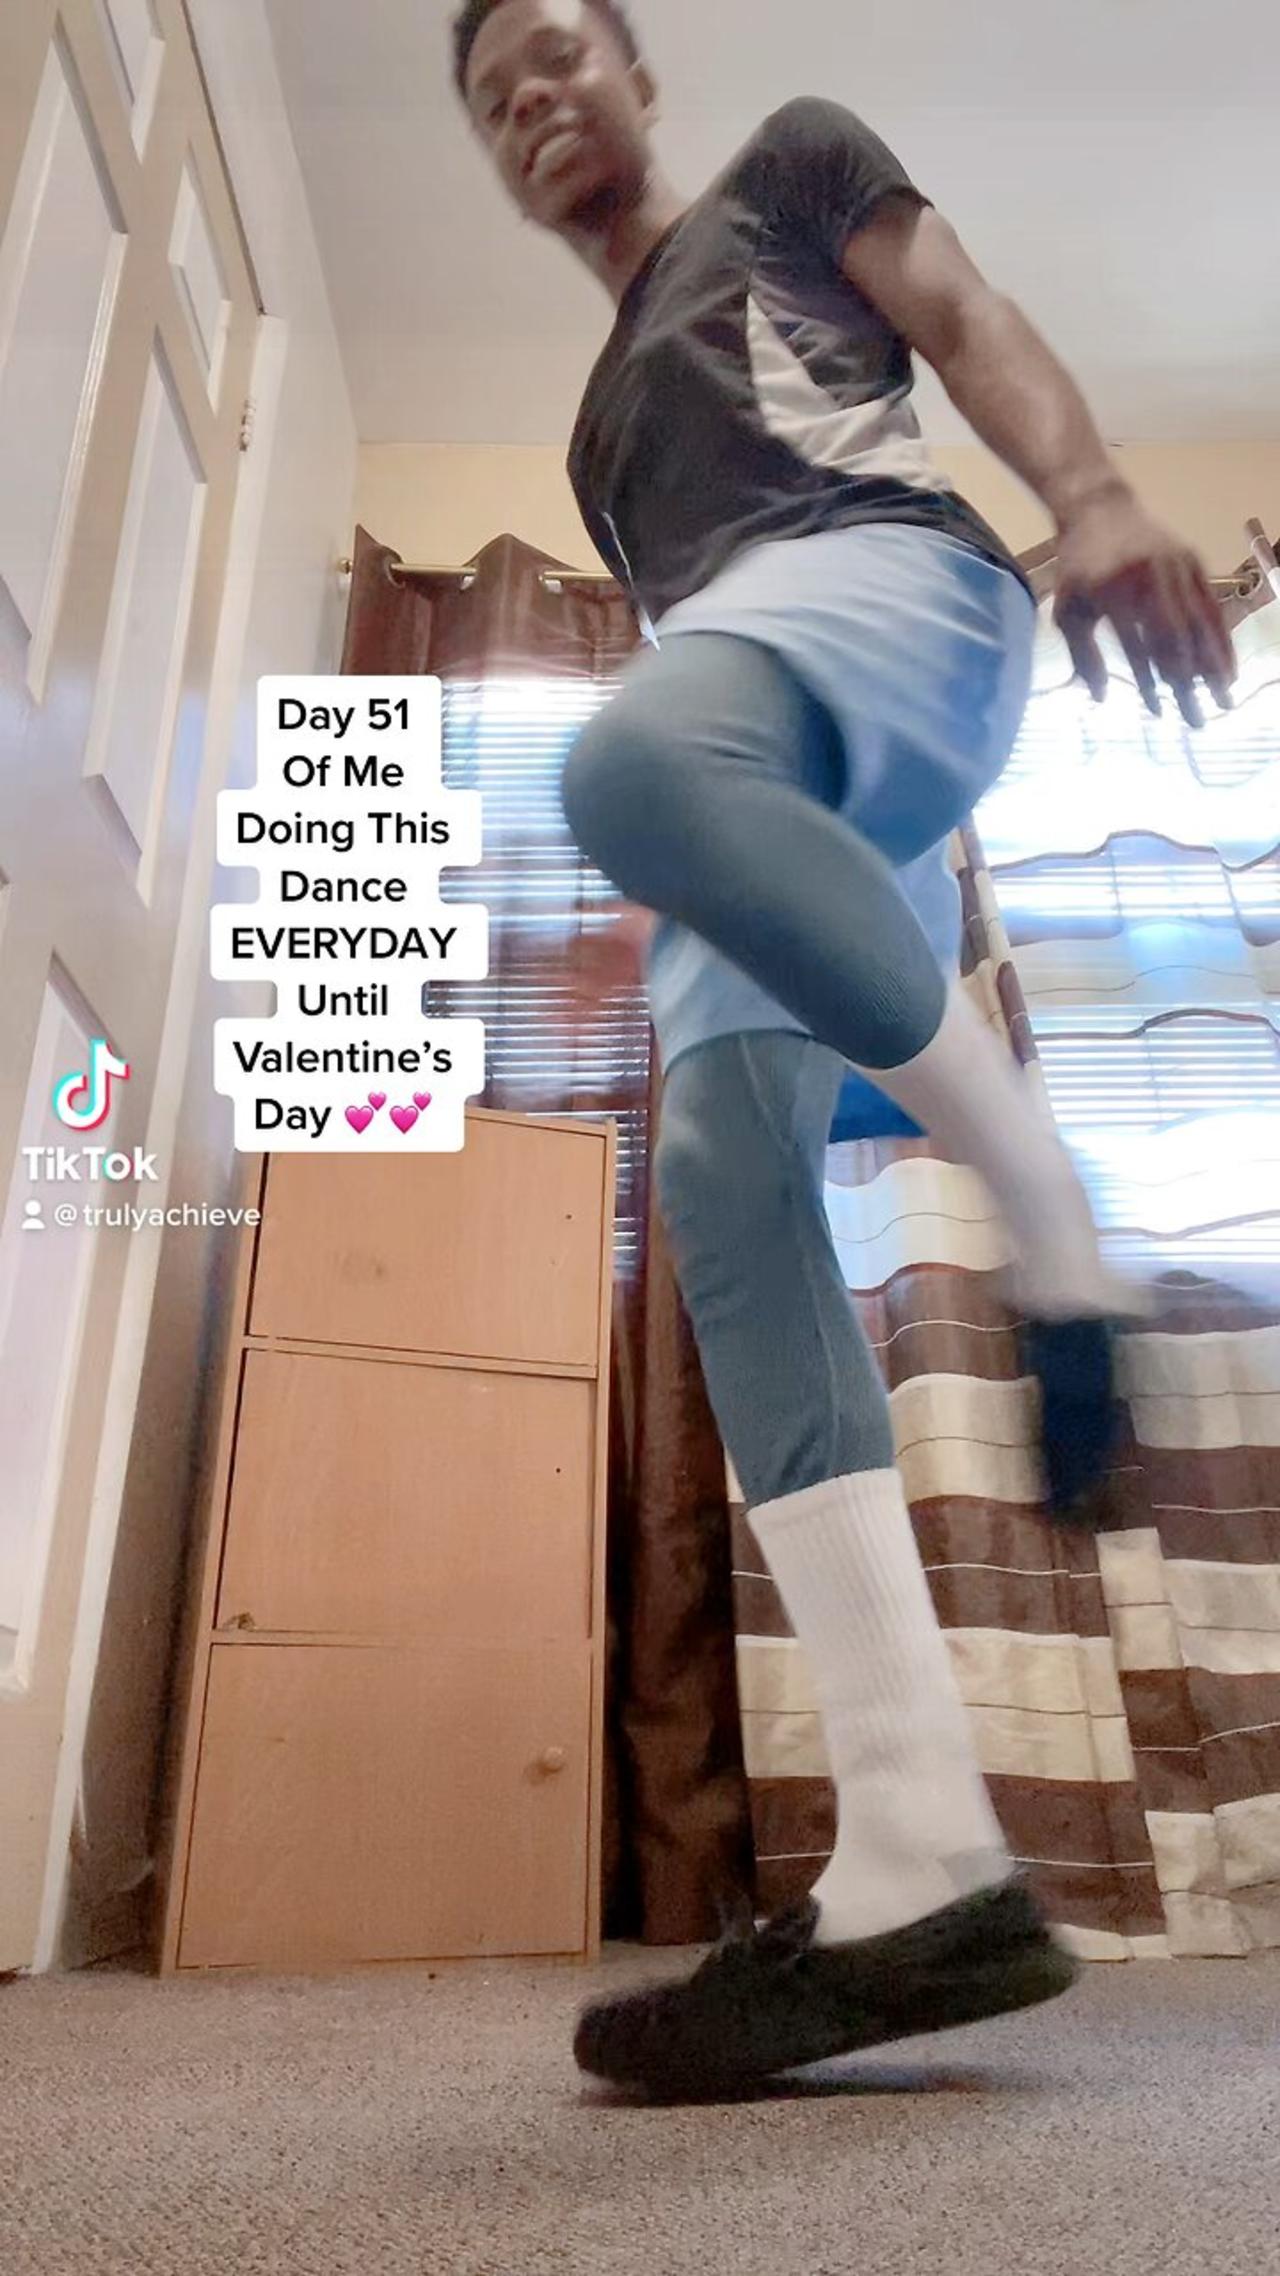 Day 51 Of Me Doing This TikTok Dance EVERYDAY Until Valentine’s Day